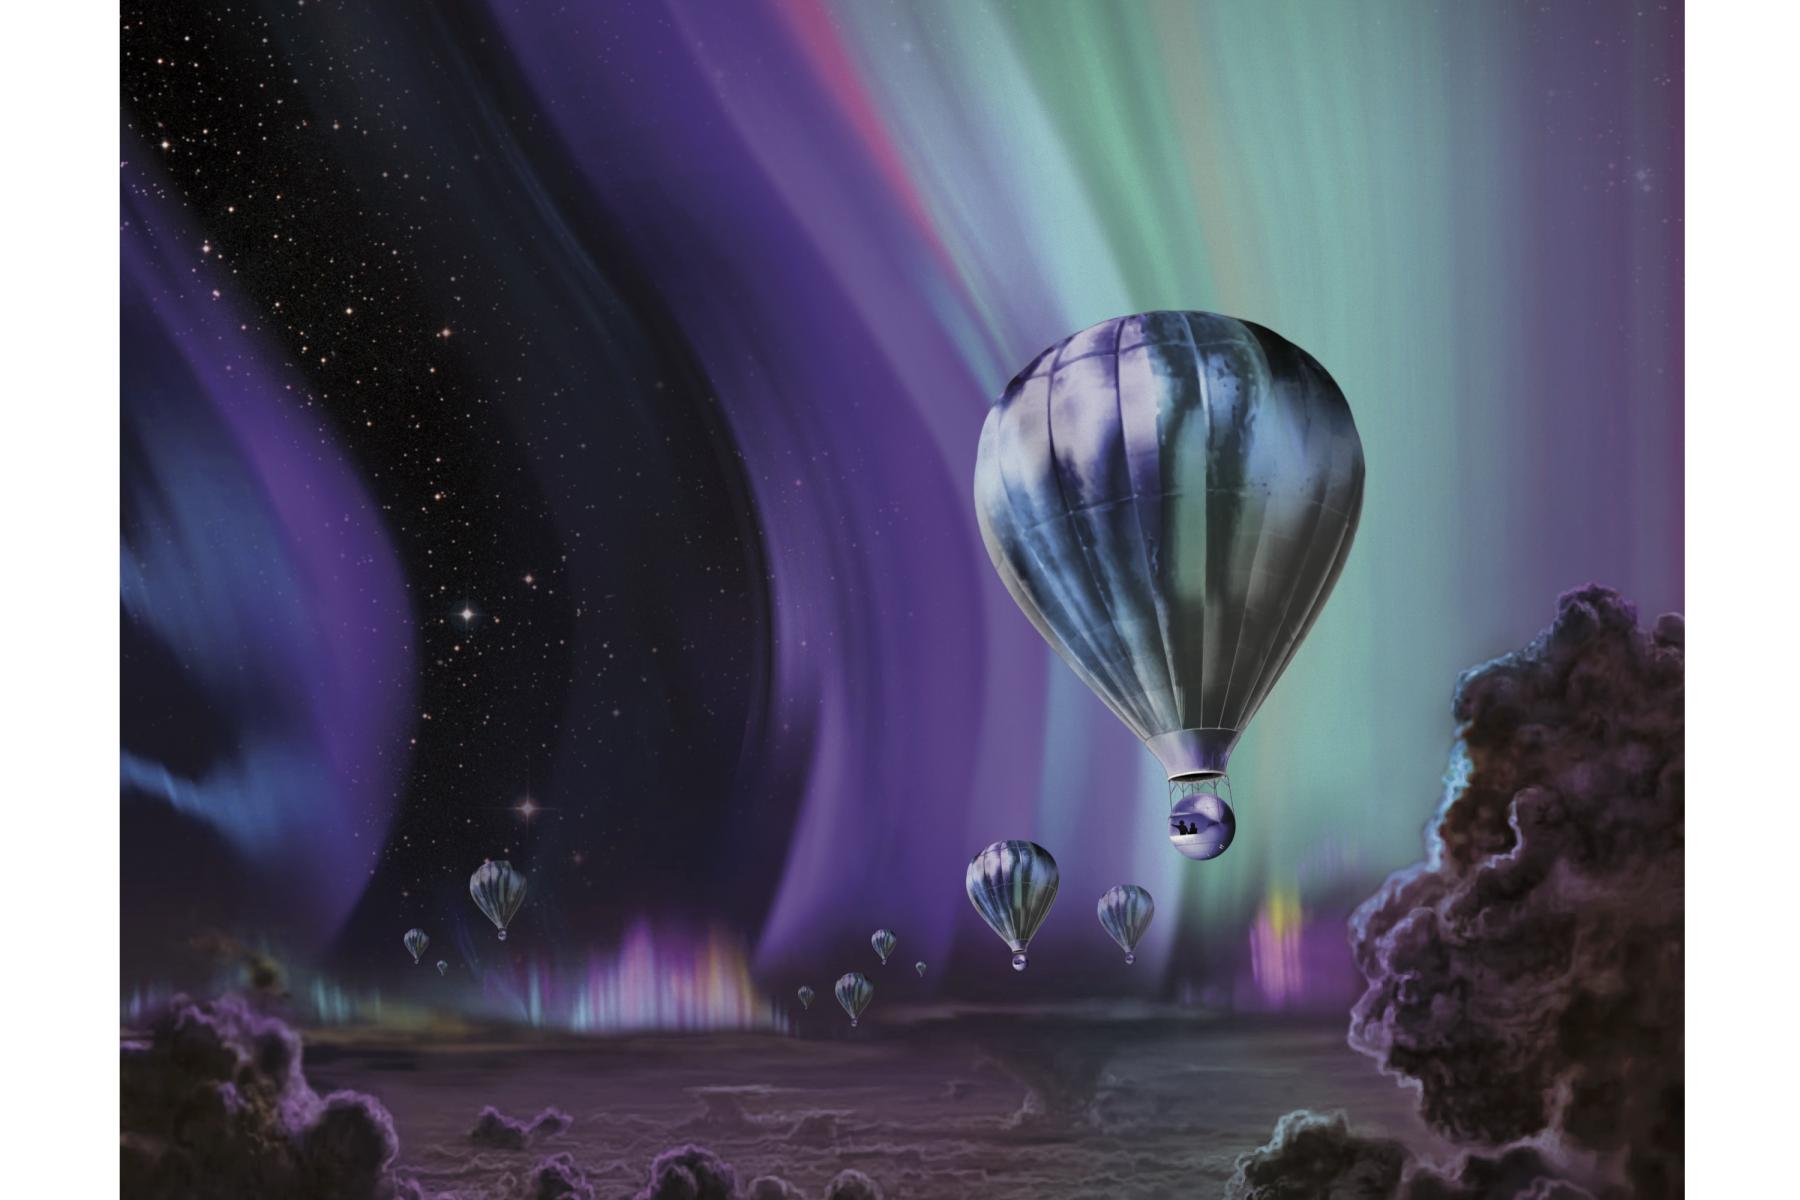 Illustration of a NASA travel poster depicting an alien world with balloon crafts in a cloudy atmosphere